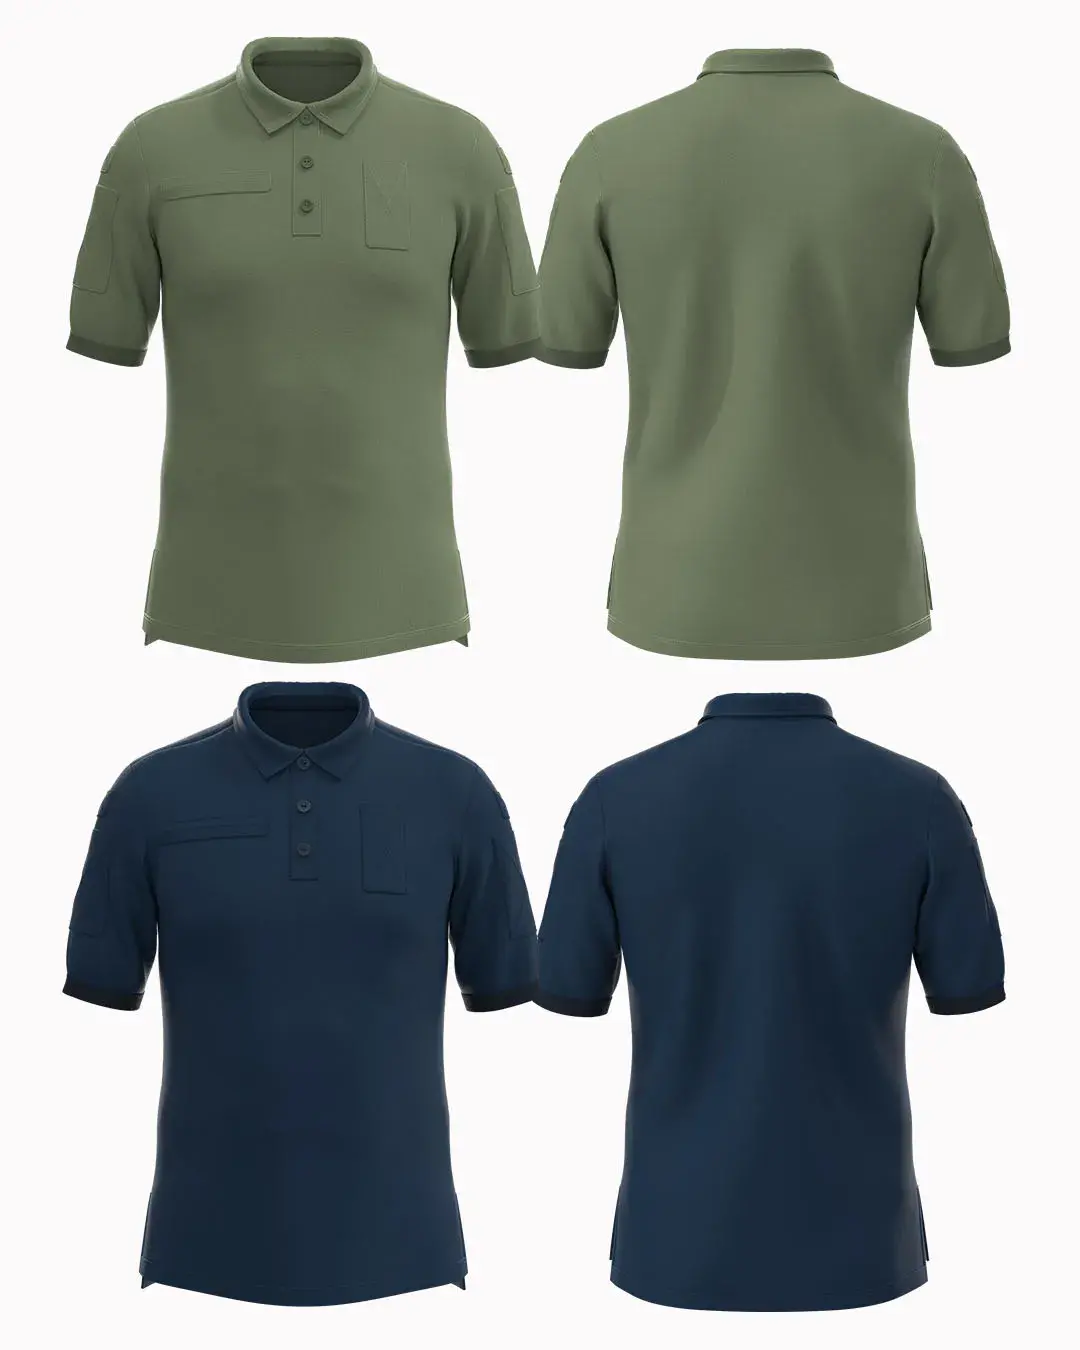 Polo shirt for the Armed Forces